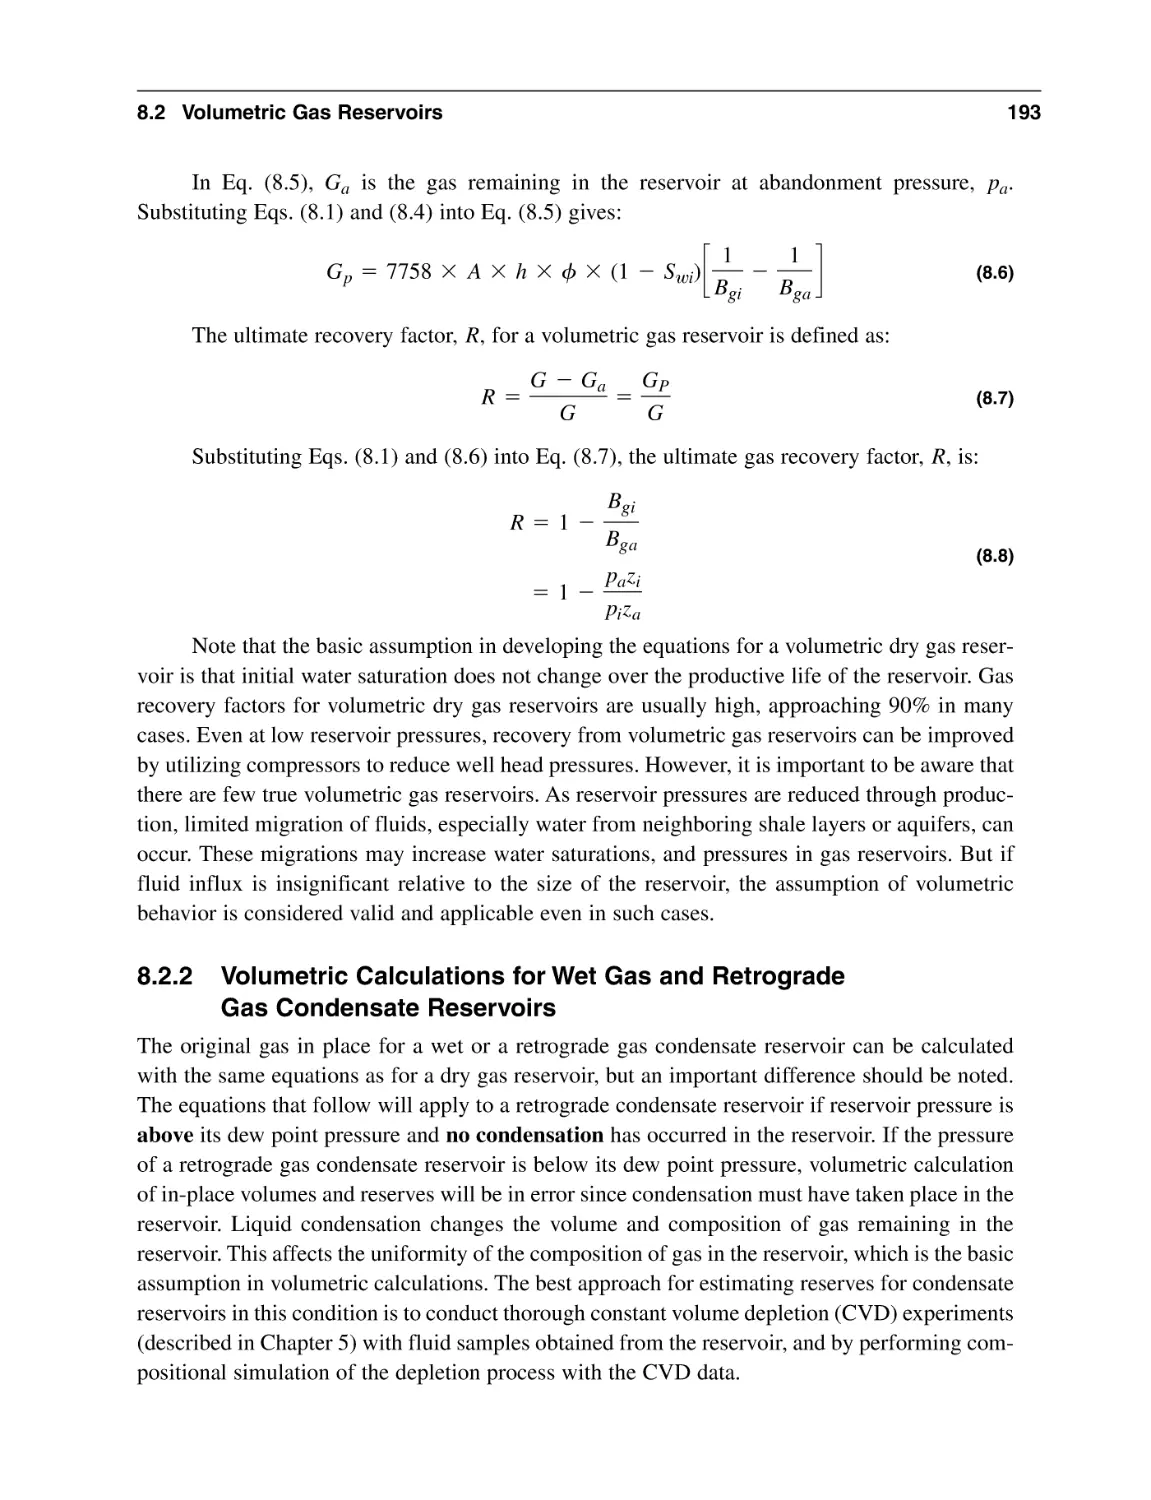 8.2.2 Volumetric Calculations for Wet Gas and Retrograde Gas Condensate Reservoirs